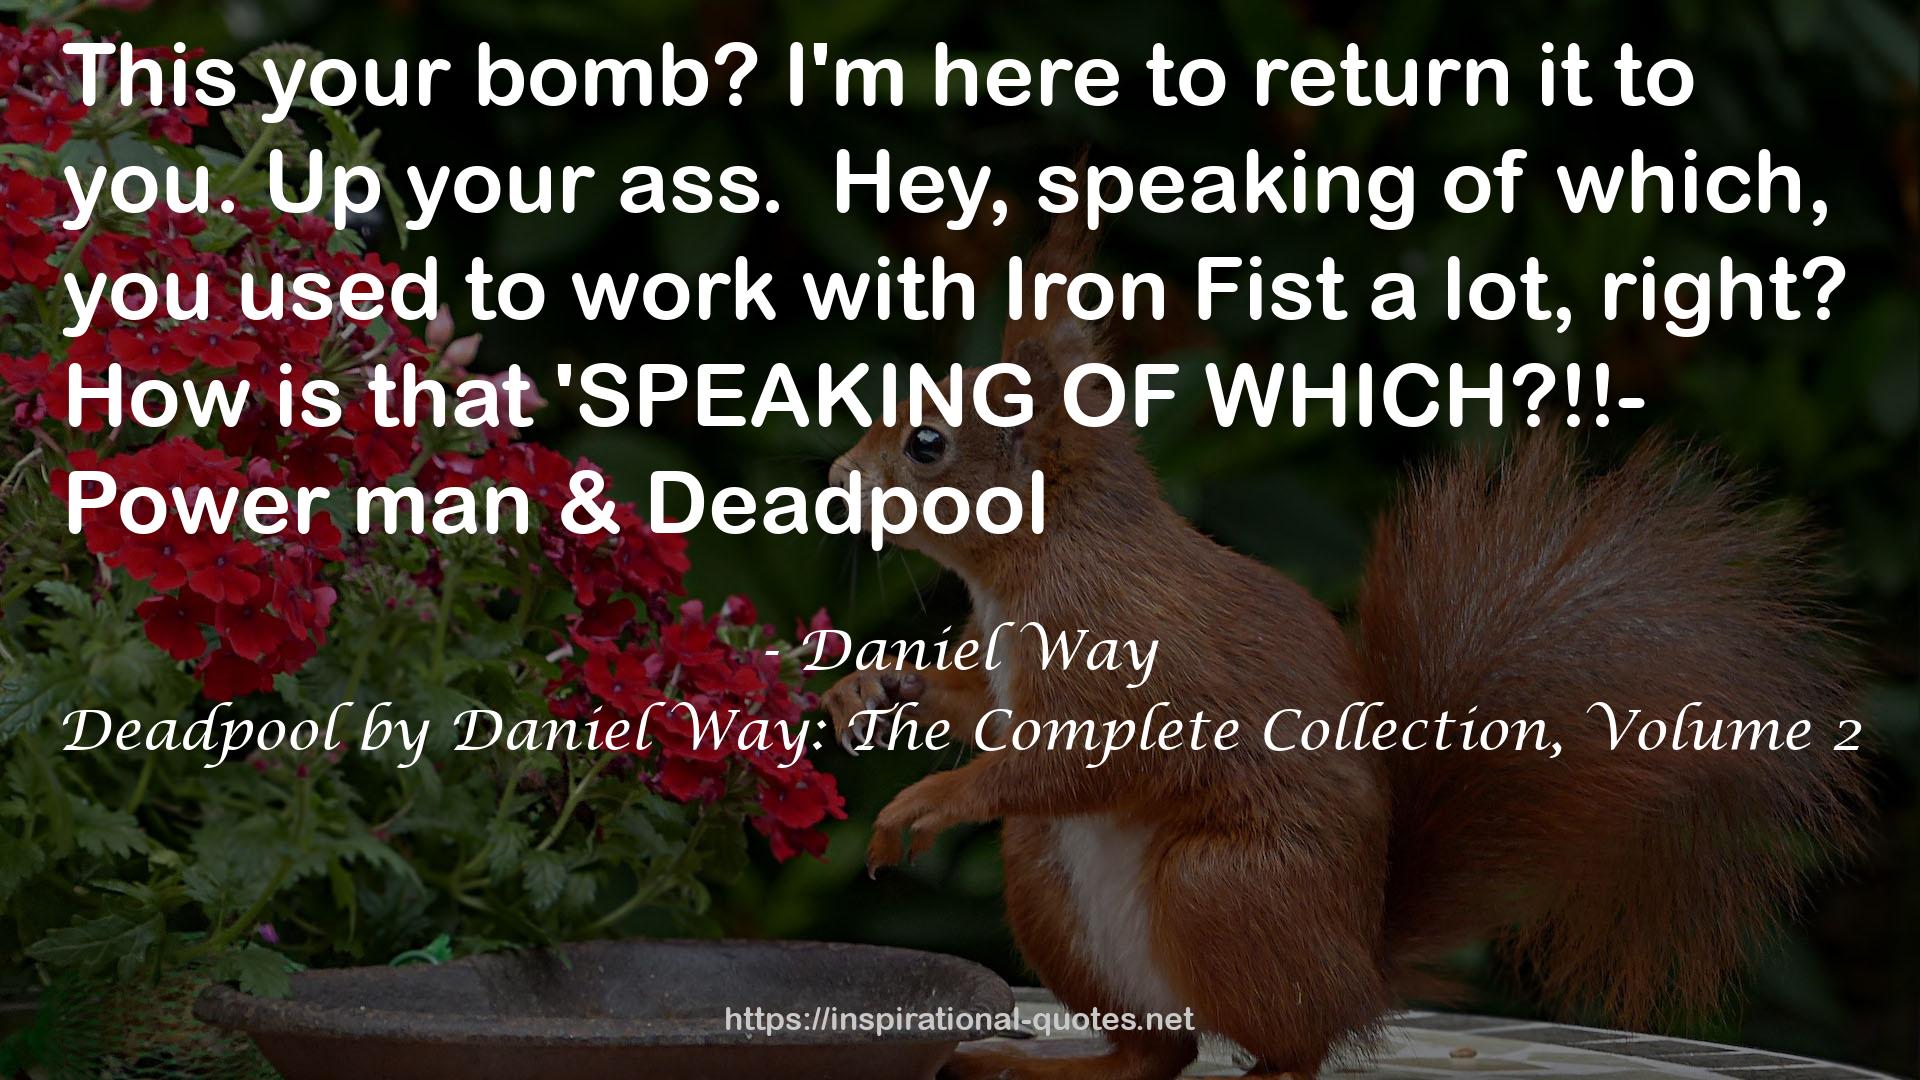 Deadpool by Daniel Way: The Complete Collection, Volume 2 QUOTES